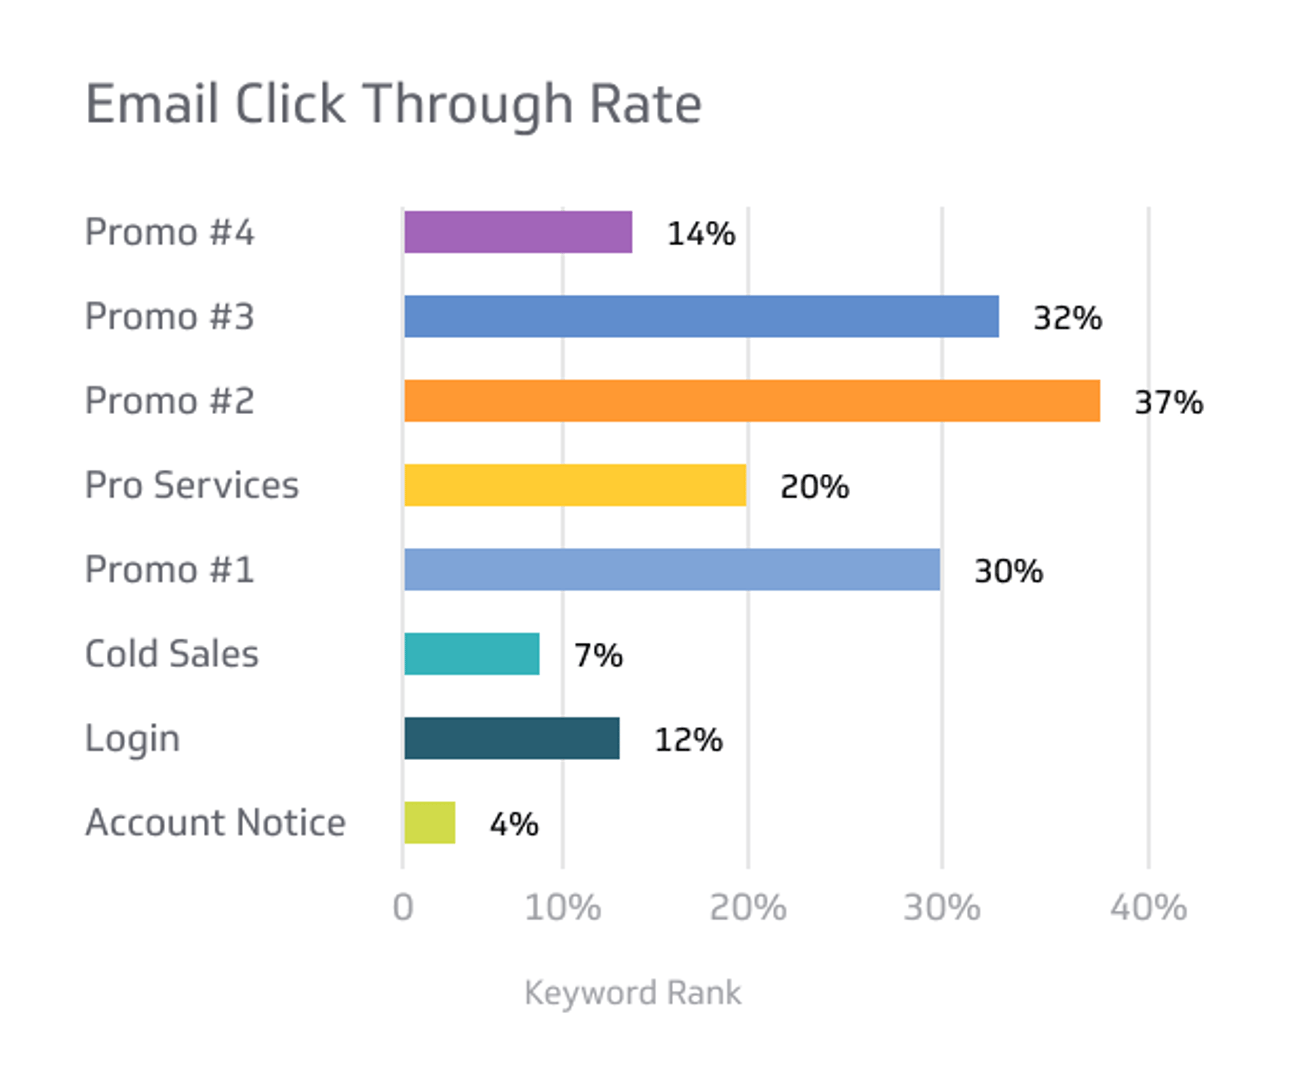 Email Marketing KPI Examples - Email Click Through Rate (CTR) Metric